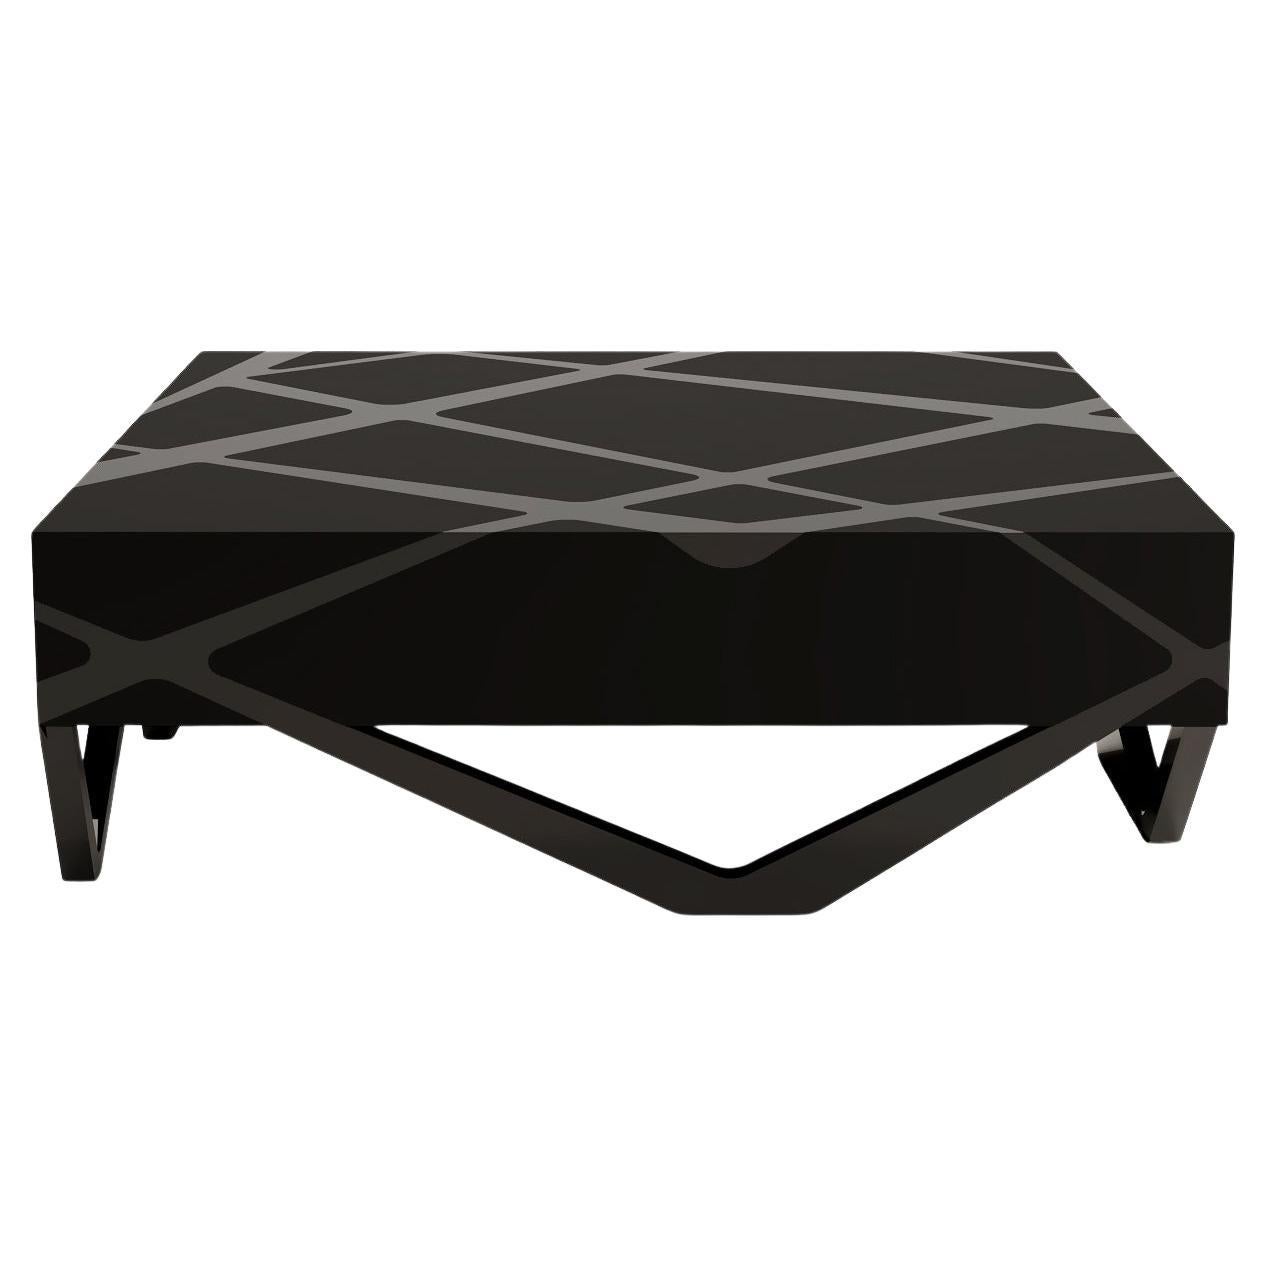 21st Century Modern Center Coffee Table in High-Gloss and Matte Black Lacquer